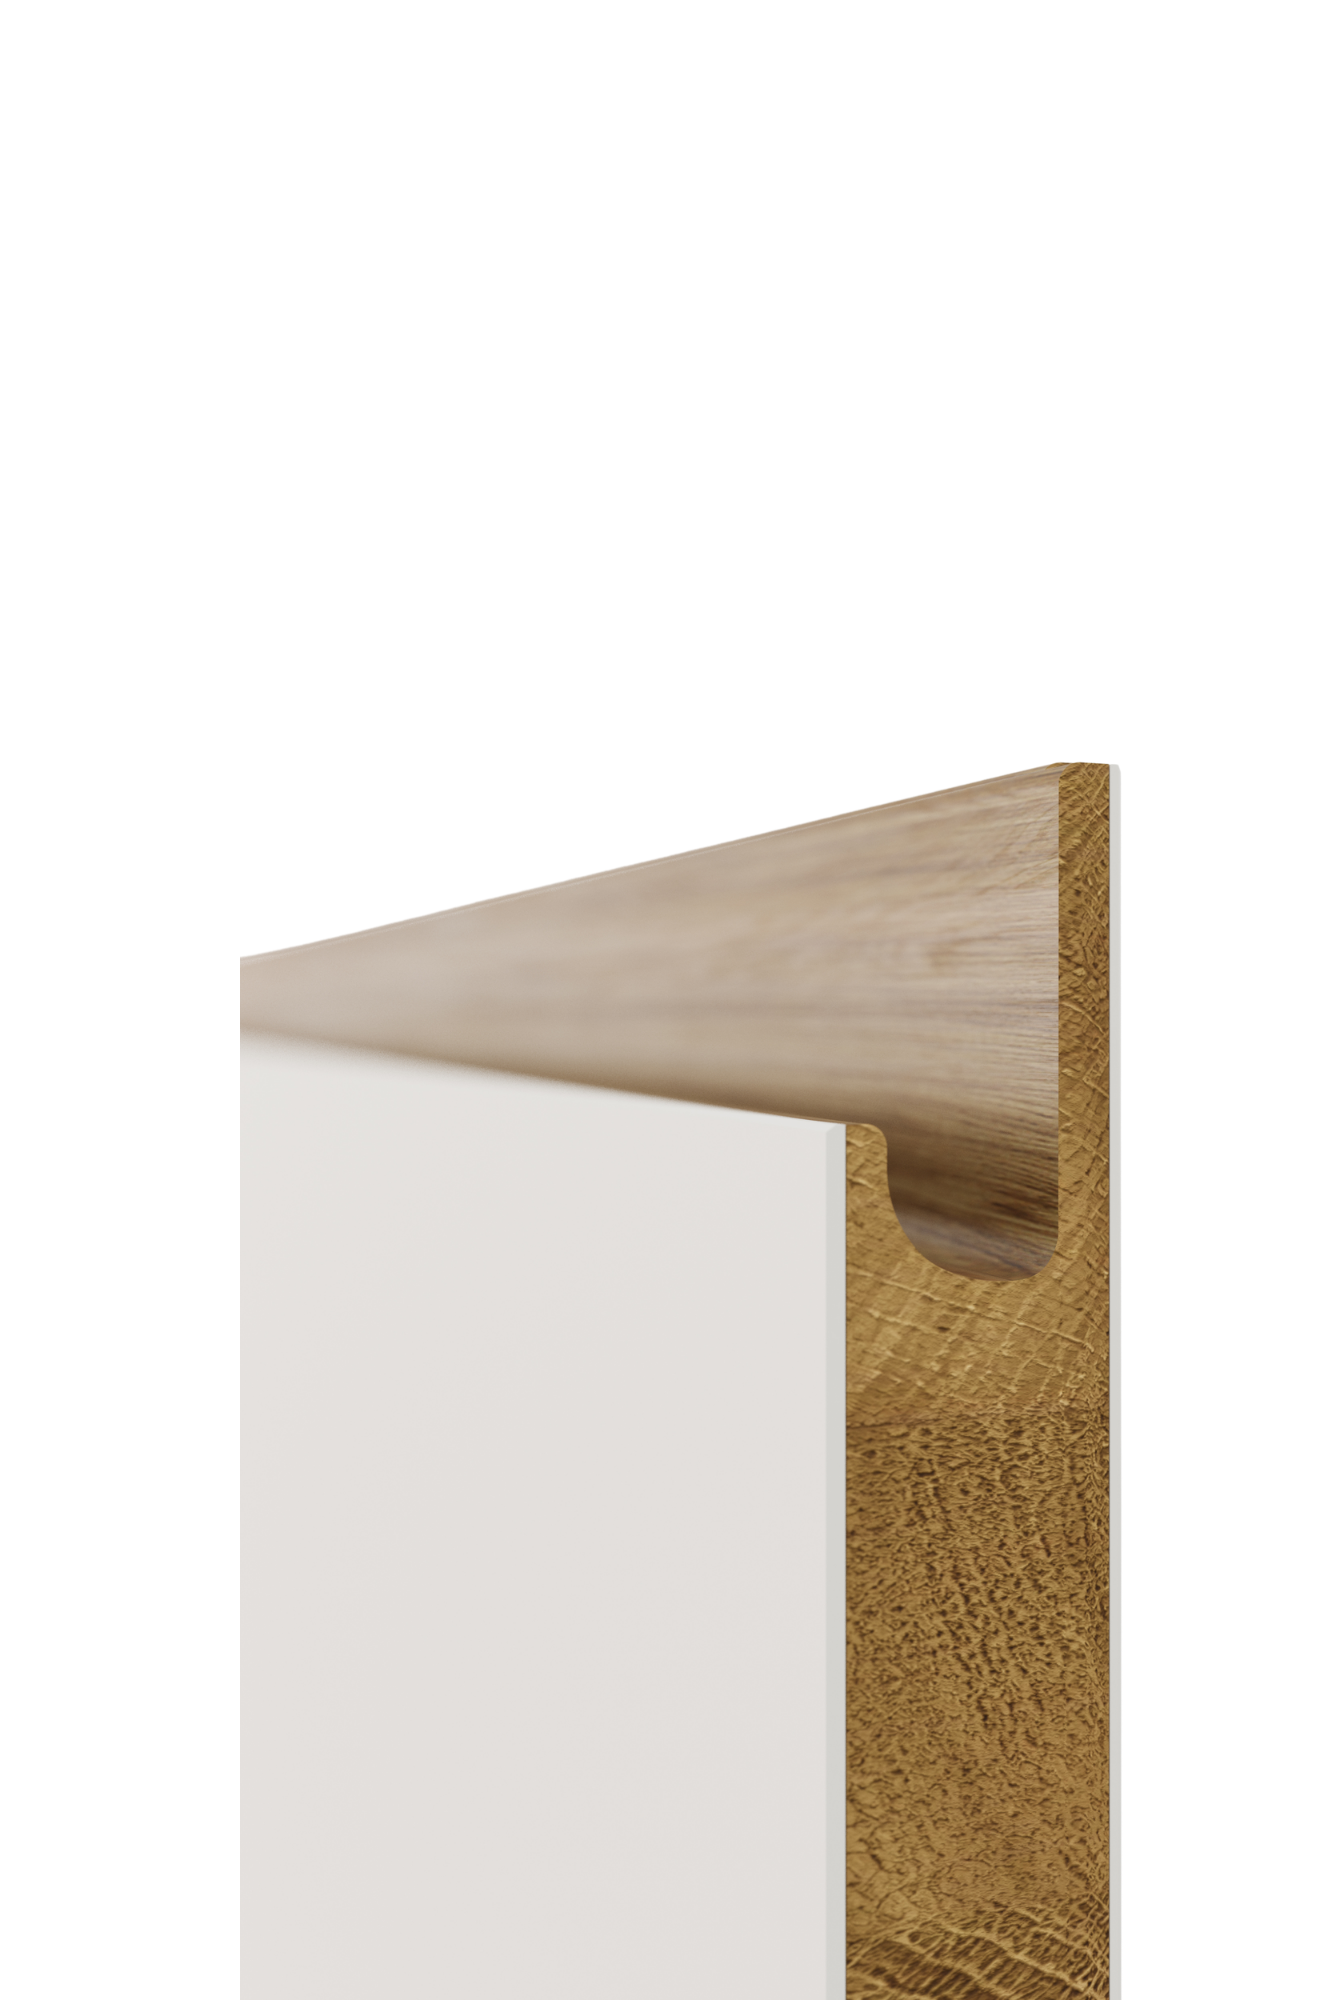 White Oak with Fenix NTM - 4 Drawer Fronts for Godmorgon